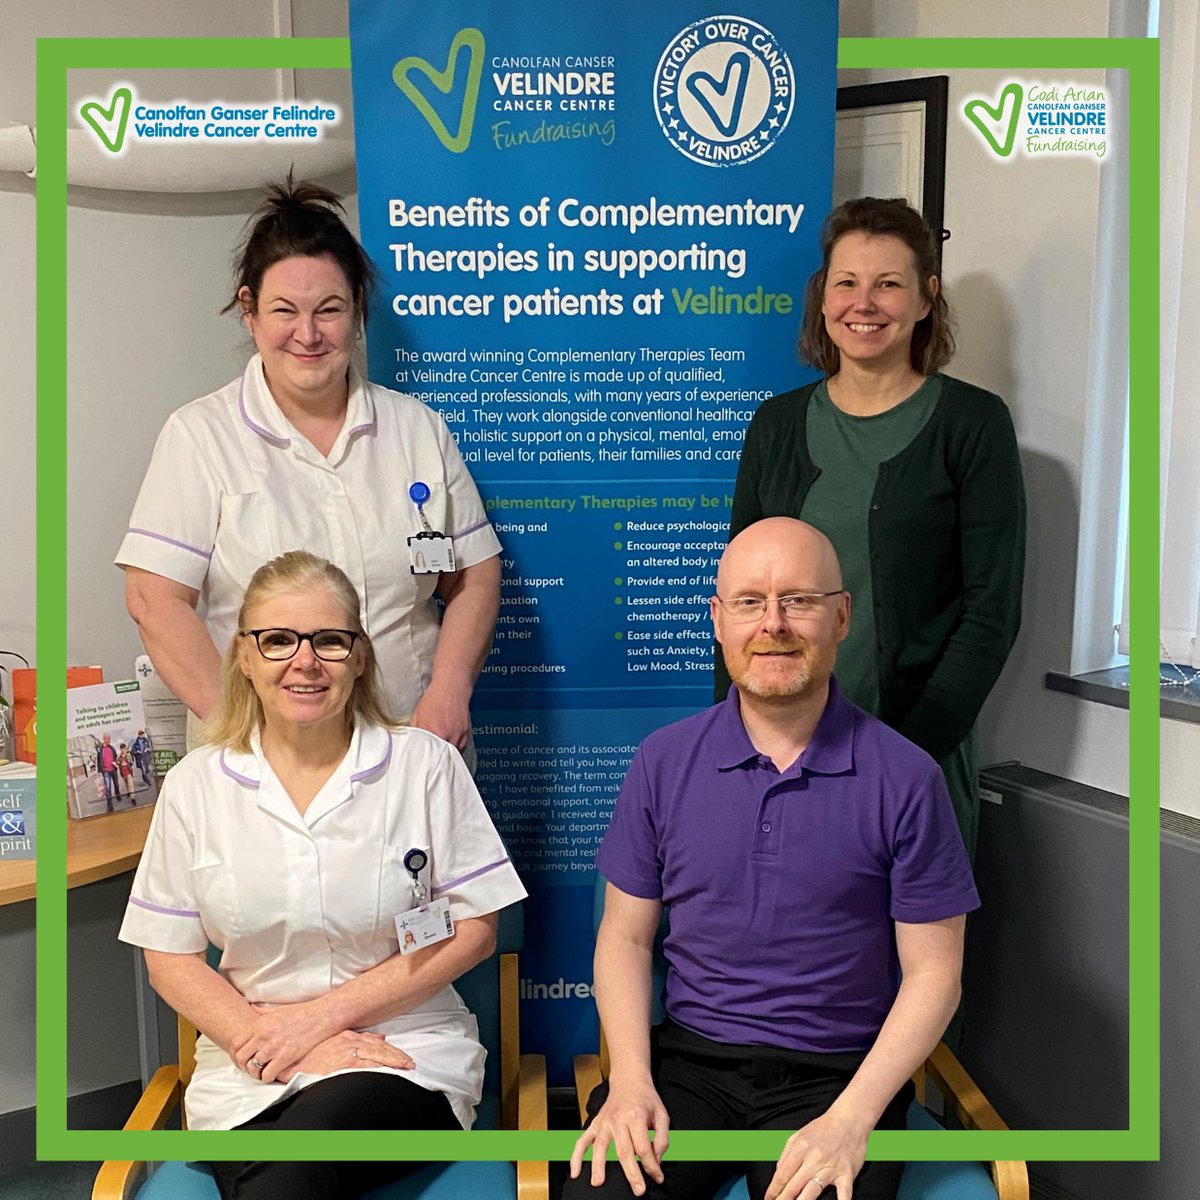 Today marks the start of Complementary Therapies Week! Our team of four see around 30 patients a month and are fully funded by the charity. Over the next few days, we’ll introduce you to the services we provide here at Velindre. More info 👉 bit.ly/4cnG1F2